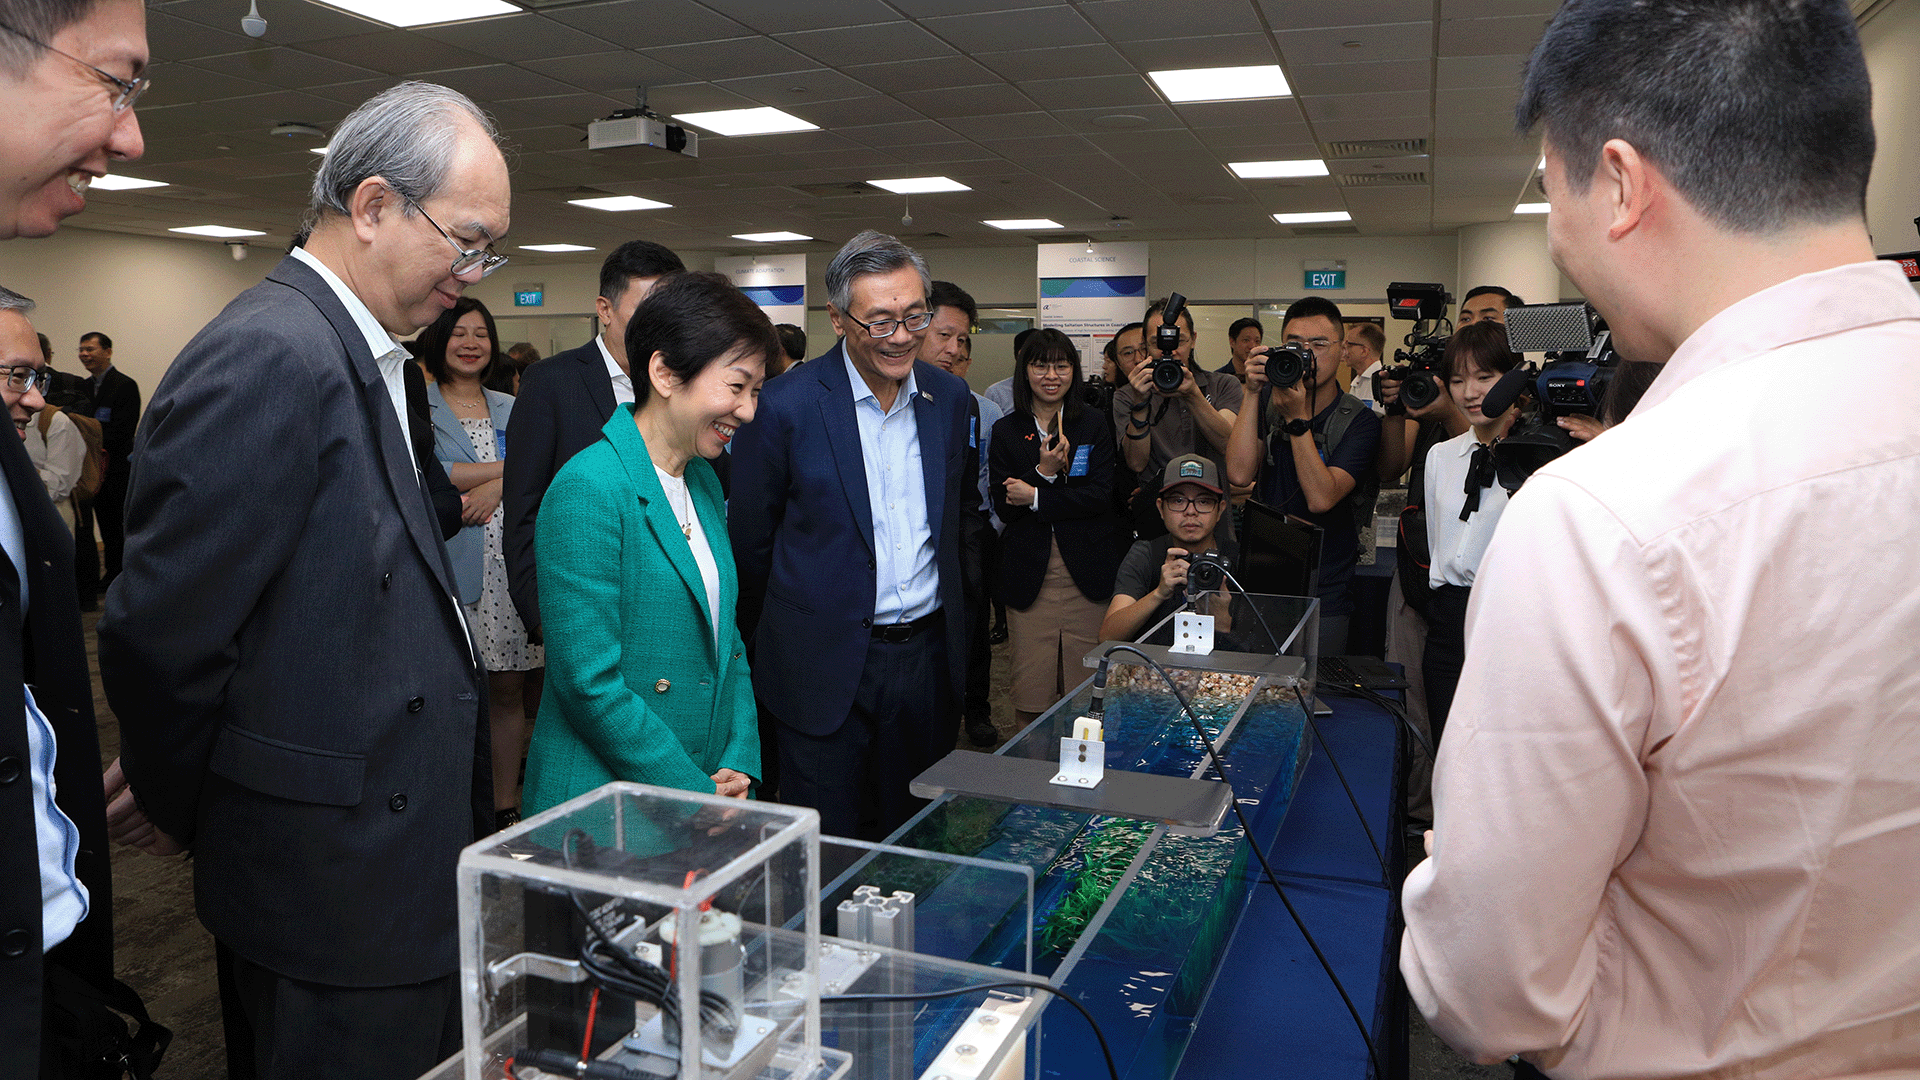 MInister Grace Fu toured an exhibition showcasing some of the launch projects CFI Singapore has embarked on.